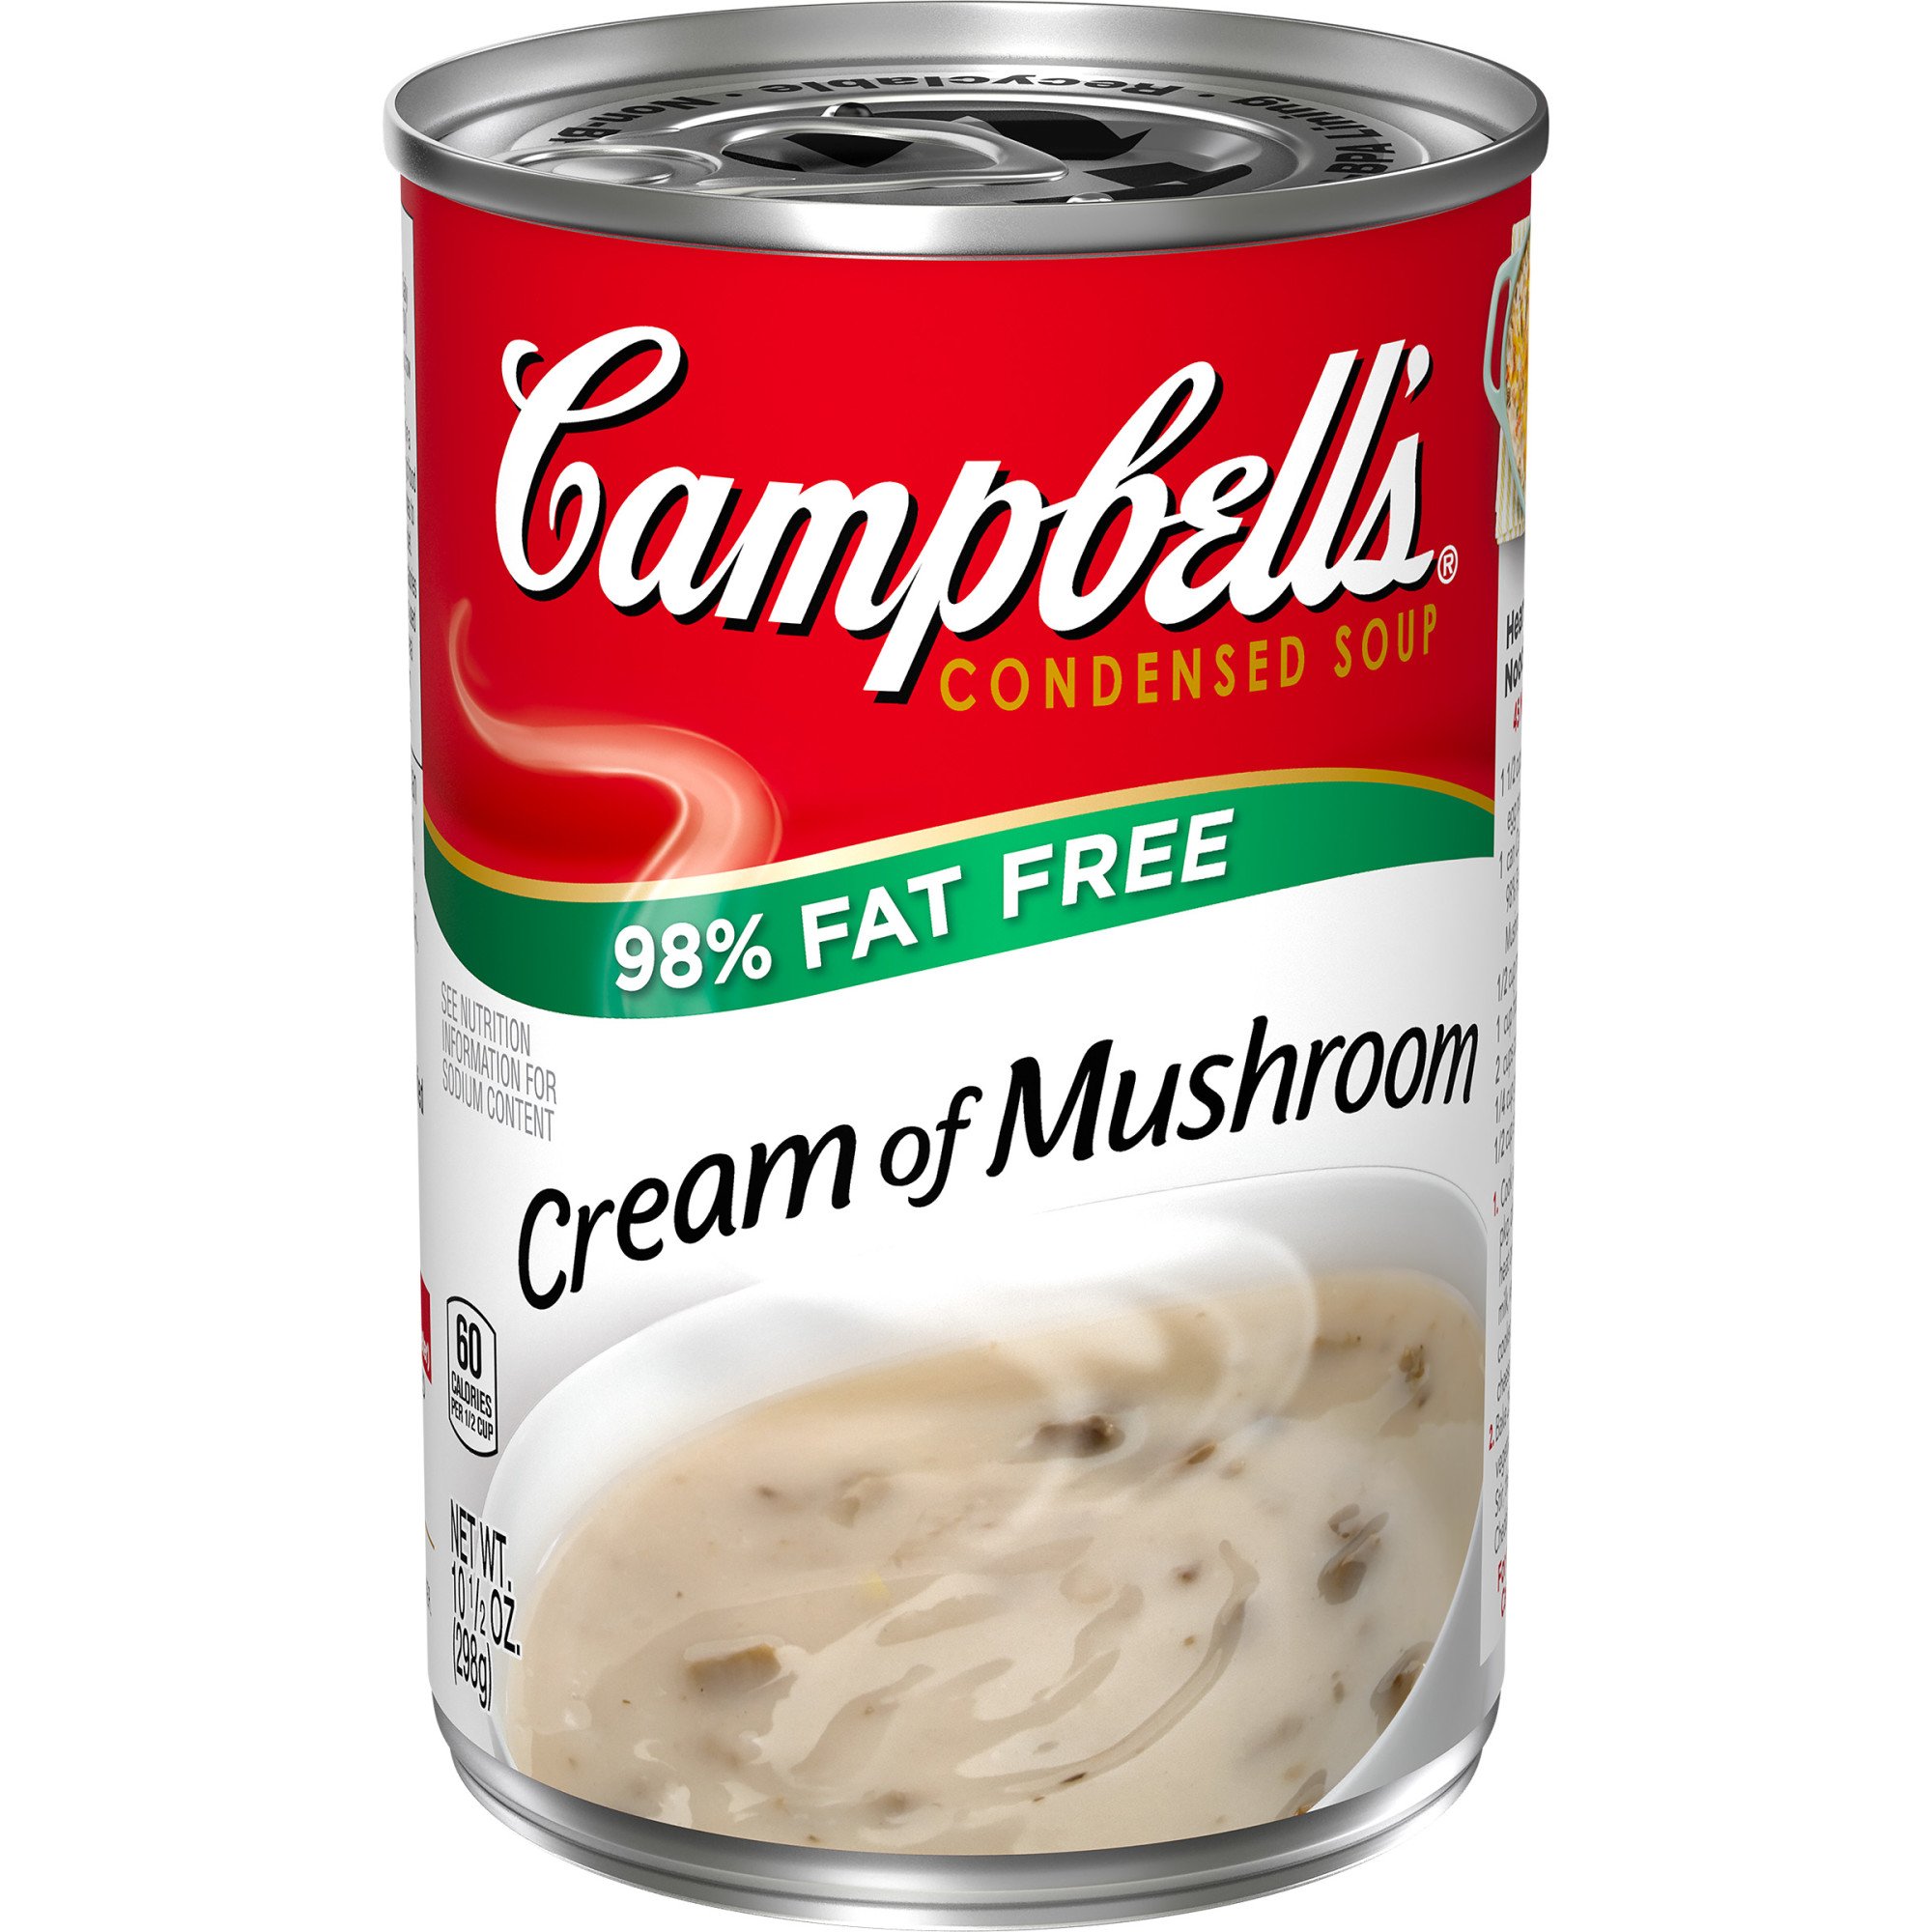 Campbells Condensed 98% Fat Free Cream of Mushroom Soup, 10.5 Ounce ...